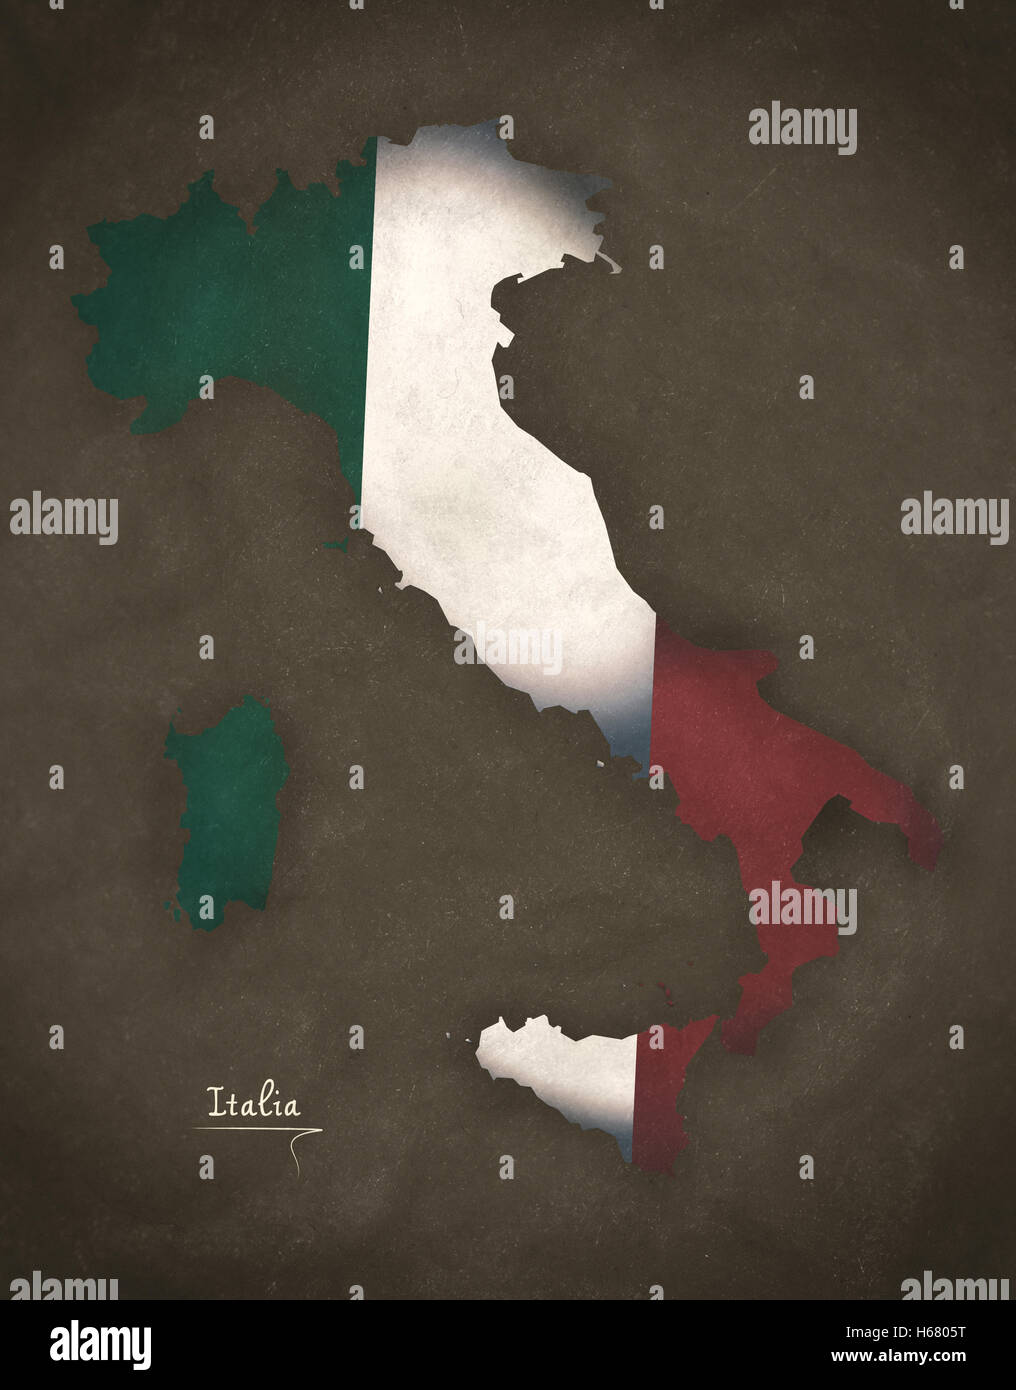 Italy map special vintage artwork style with flag illustration Stock Photo